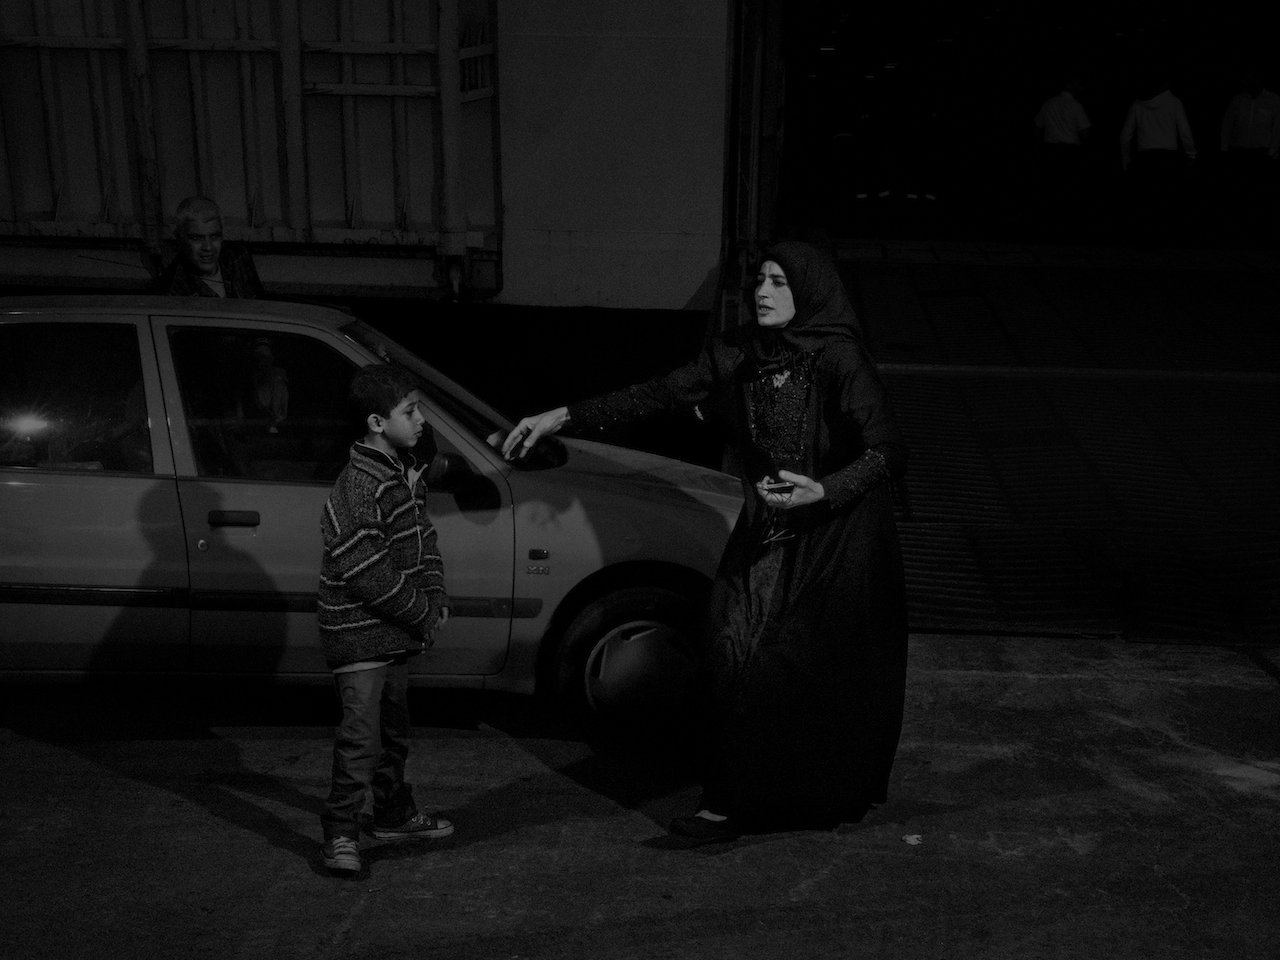 Greece. 2015. A syrian refugee woman desperately searching for her two year old child which she lost on the journey to Pireus from Lesbos. While I was photographing the refugees coming into the port, I noticed this woman who was desperately searching for her lost child and was surprised to see her leave without having found her. She was faced with a hard decision: choosing to leave a child behind and carry on her journey for her other children’s sake or lose the bus that would take her to the next checkpoint of her journey.